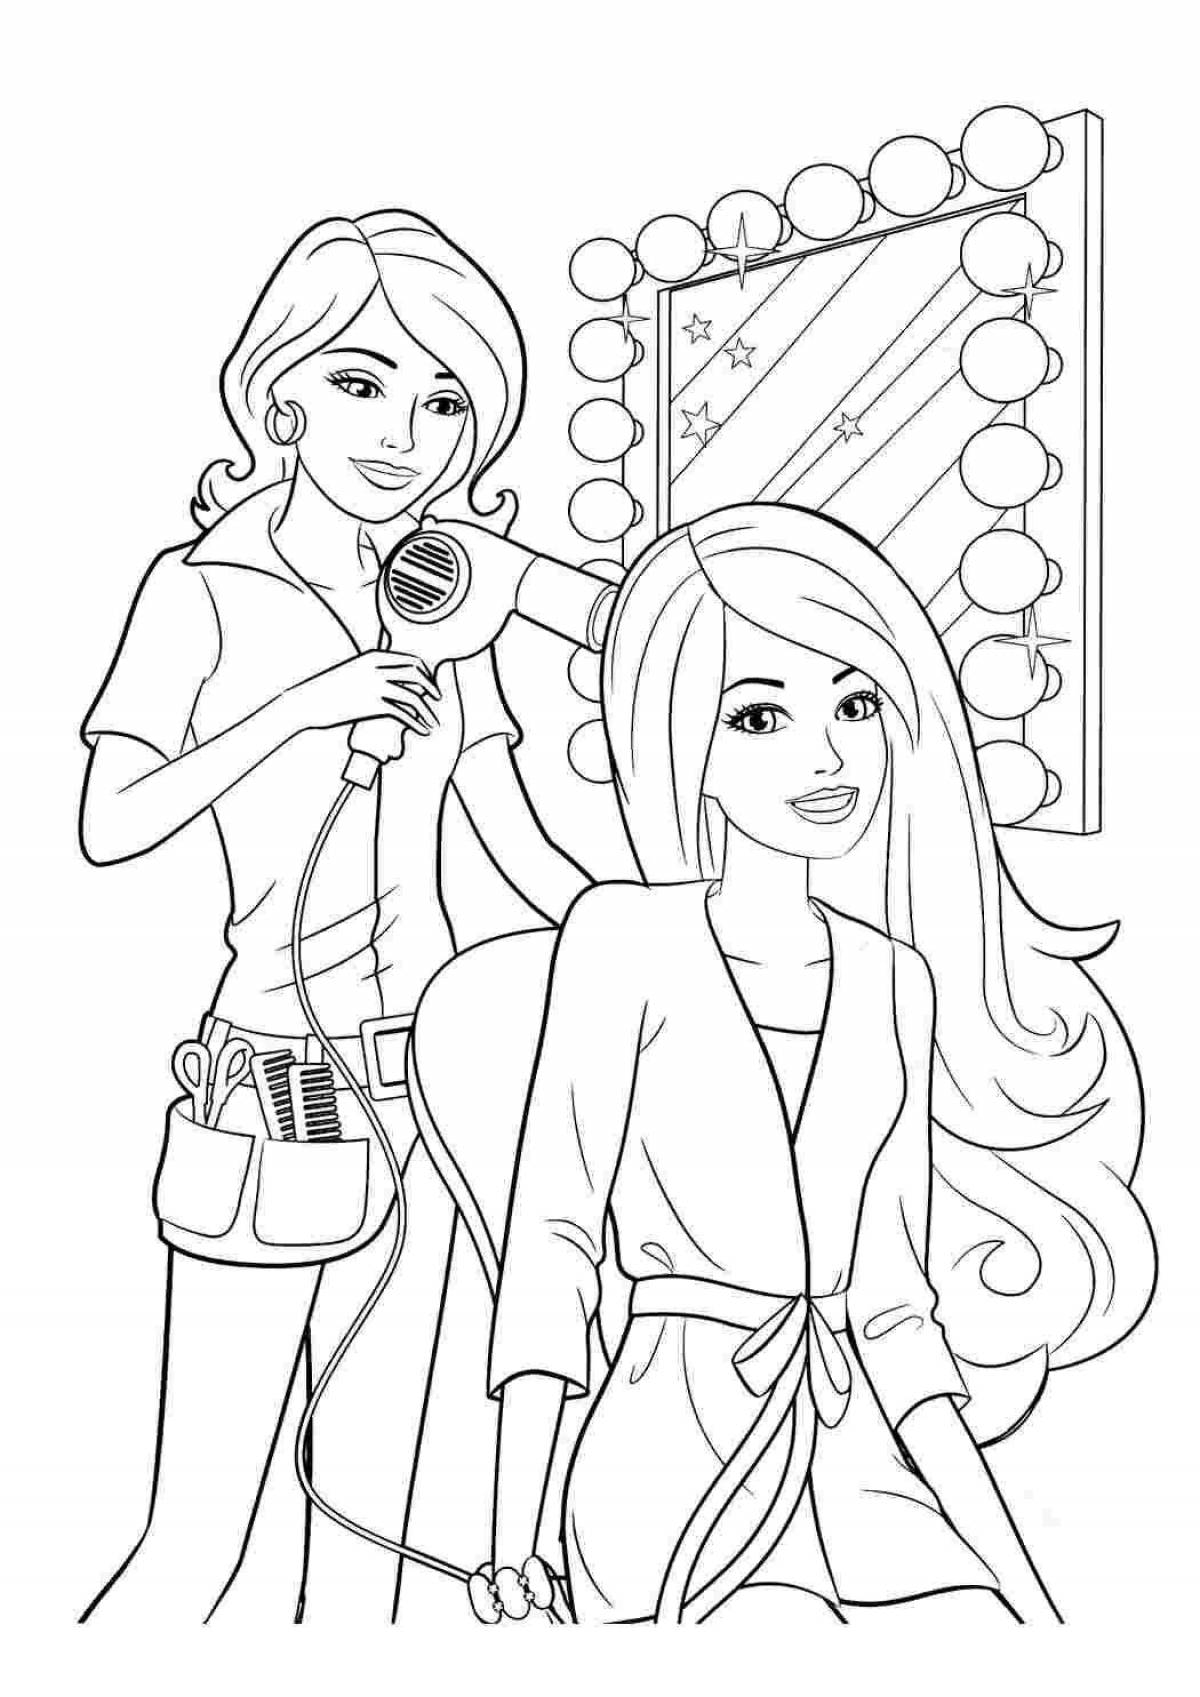 Coloring book shining barbie and daughter